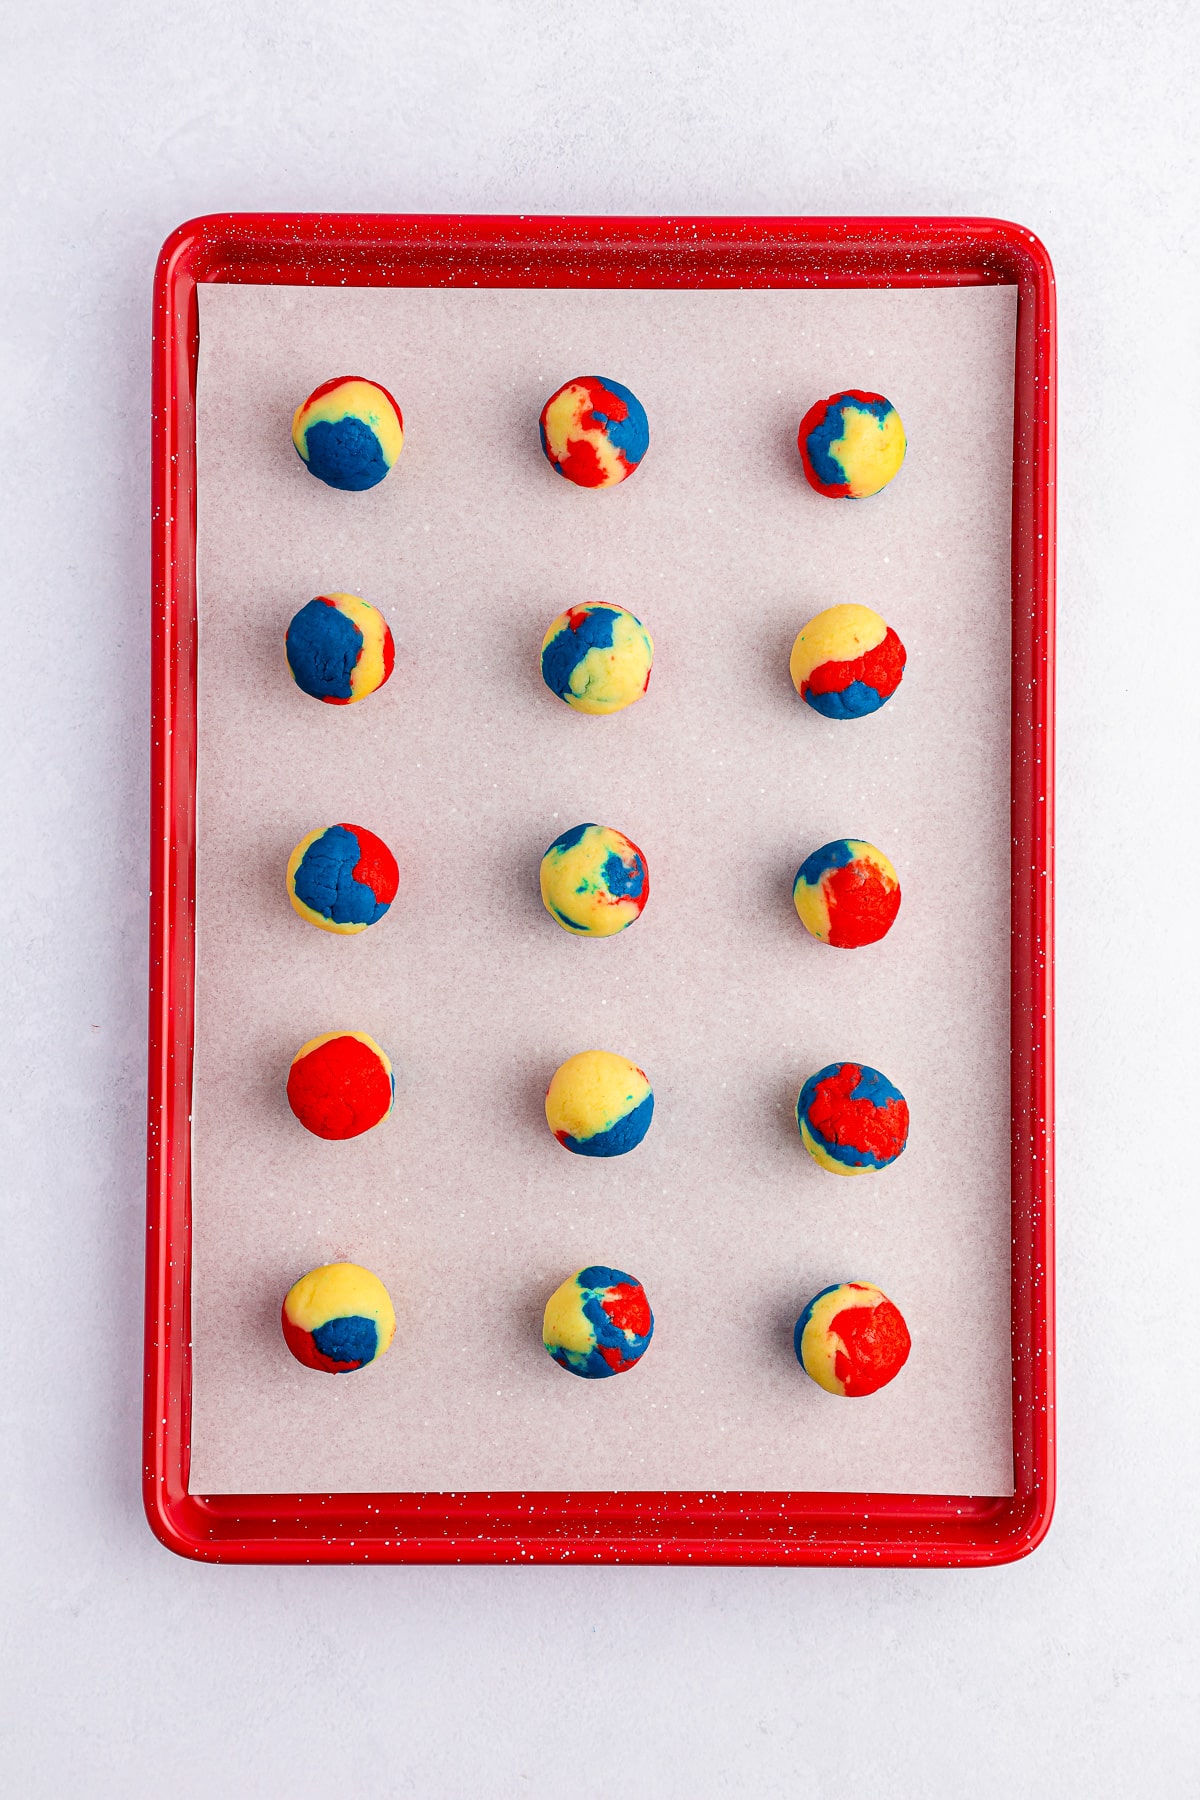 Red white and blue cake rolled together into cake balls on a baking sheet from overhead.